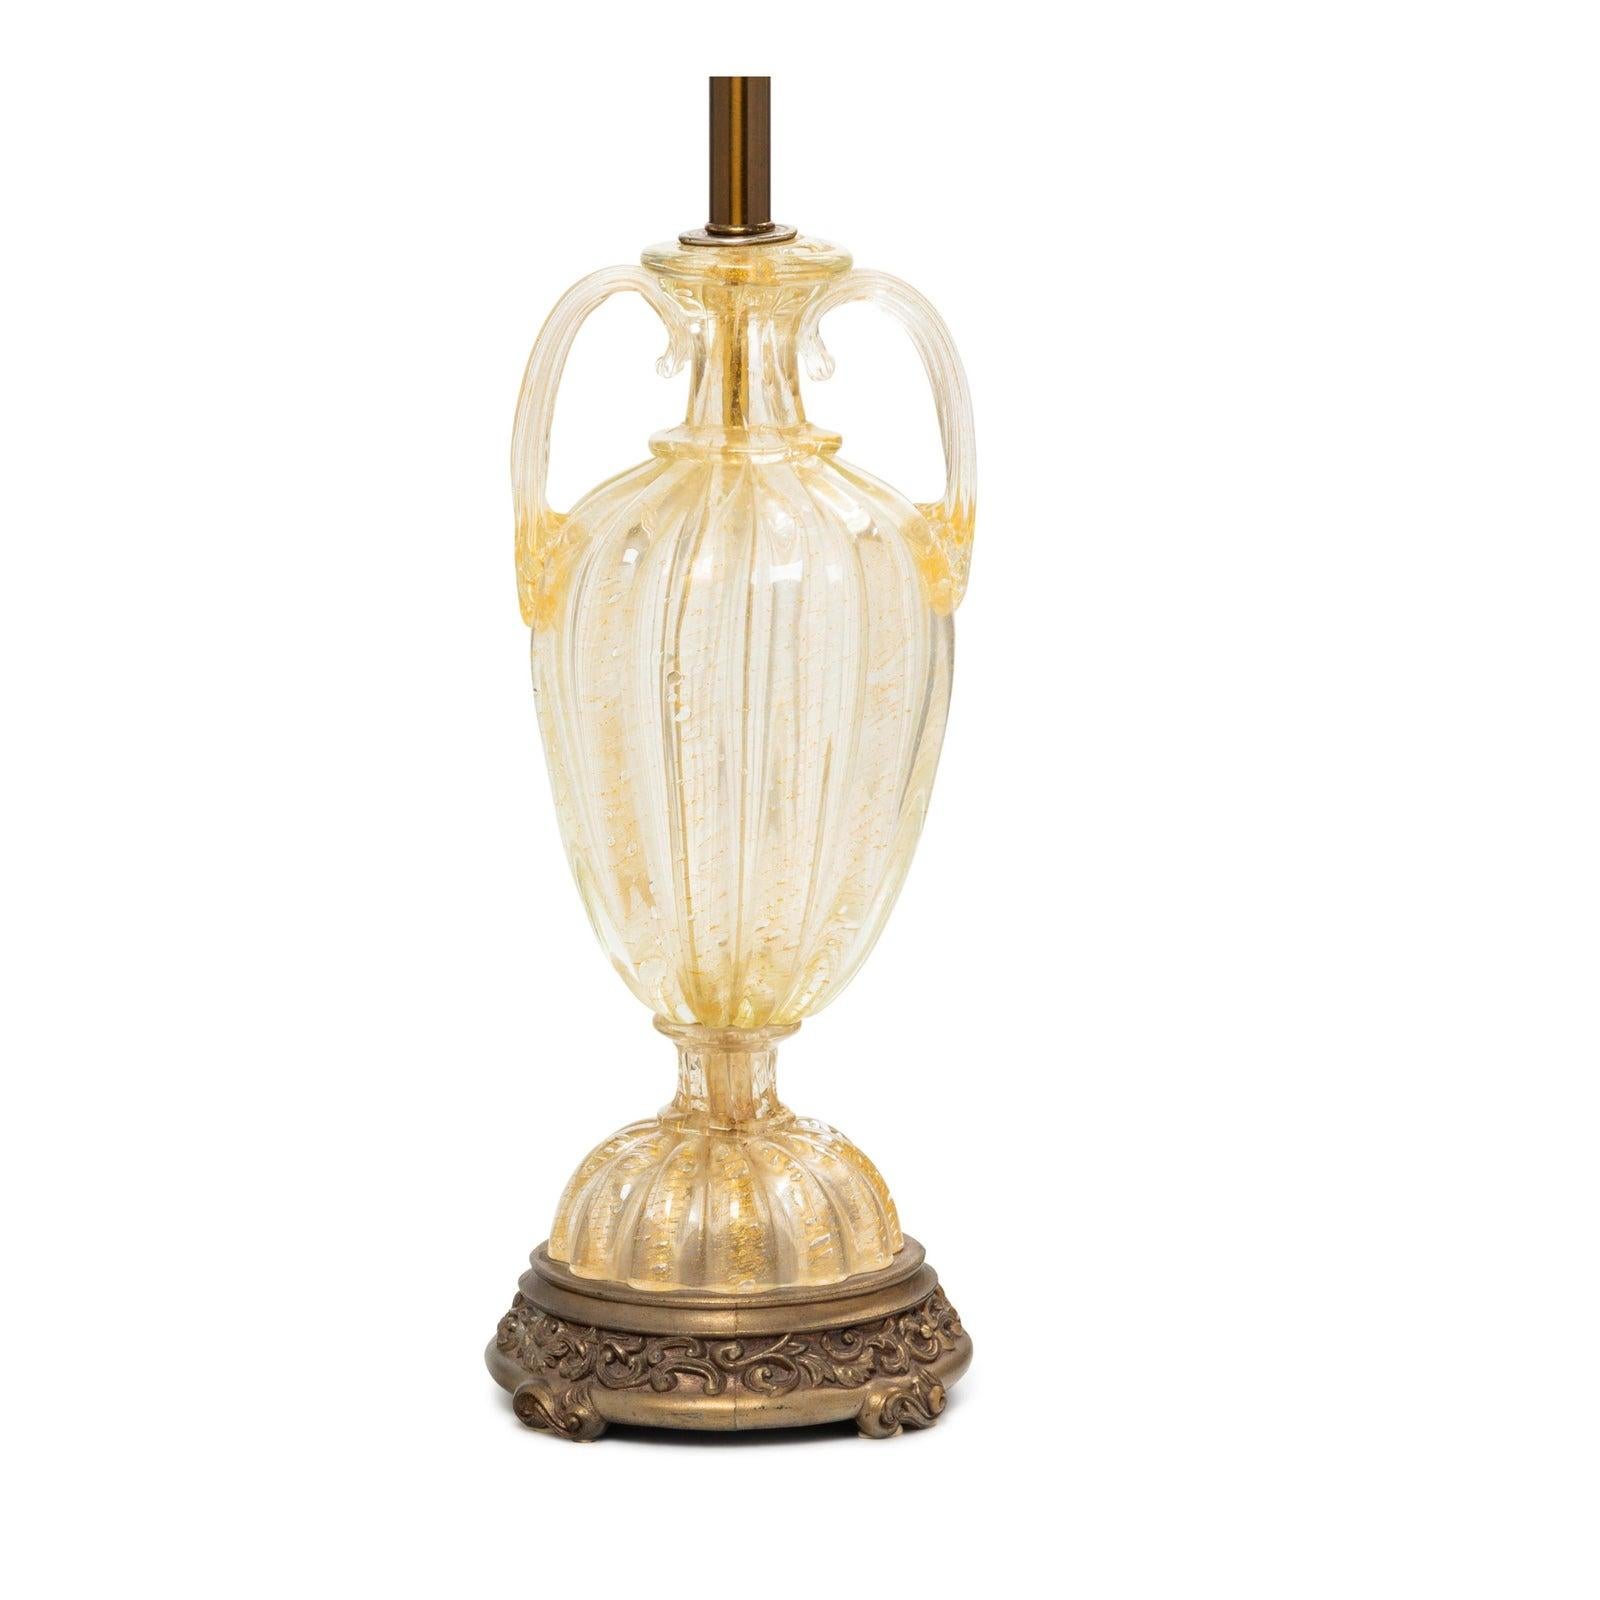 Barovier & Toso mid-20th century Murano Italian art glass table lamp, custom shade

This lovely lamp features gold inclusions in clear glass and includes an expensive hand smocked shade.